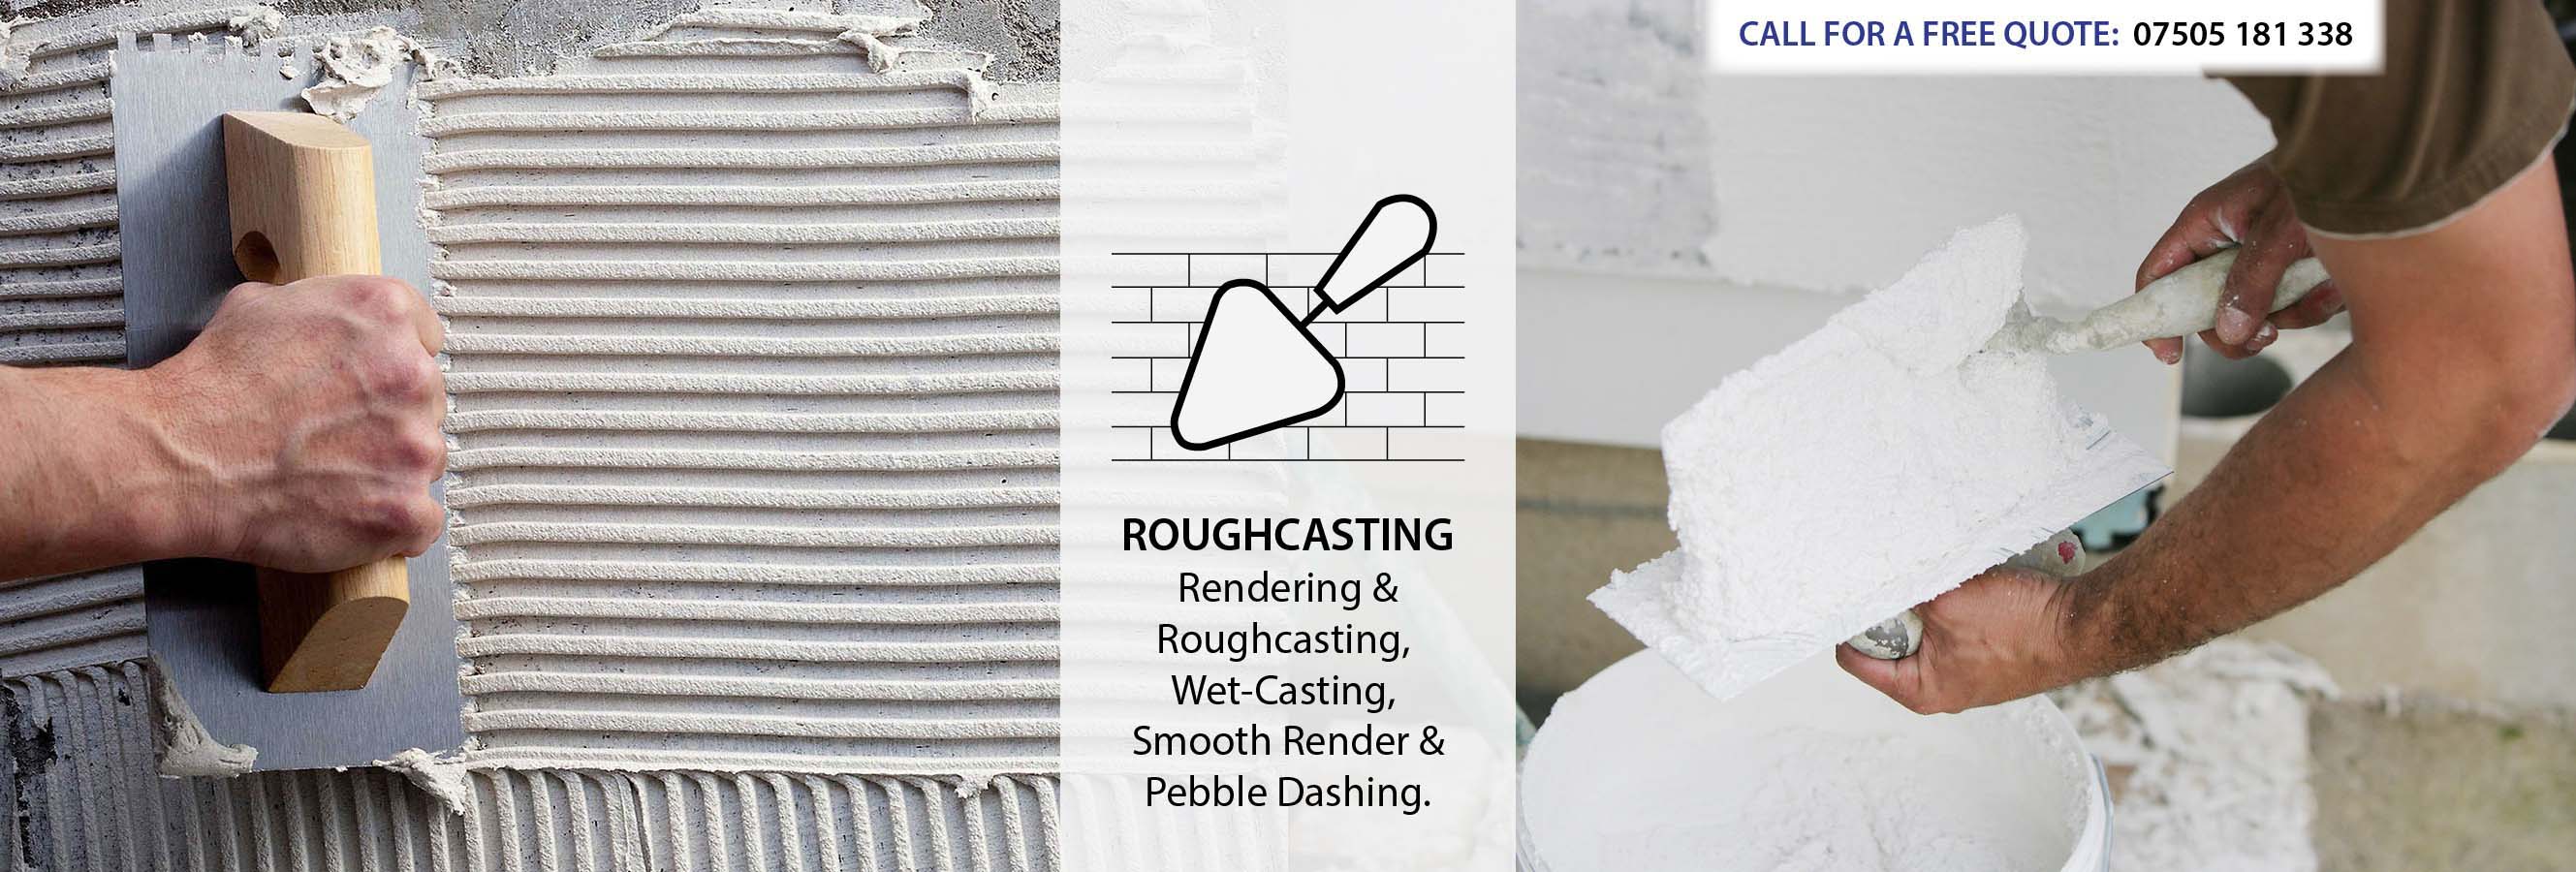 All Types of Roughcasting